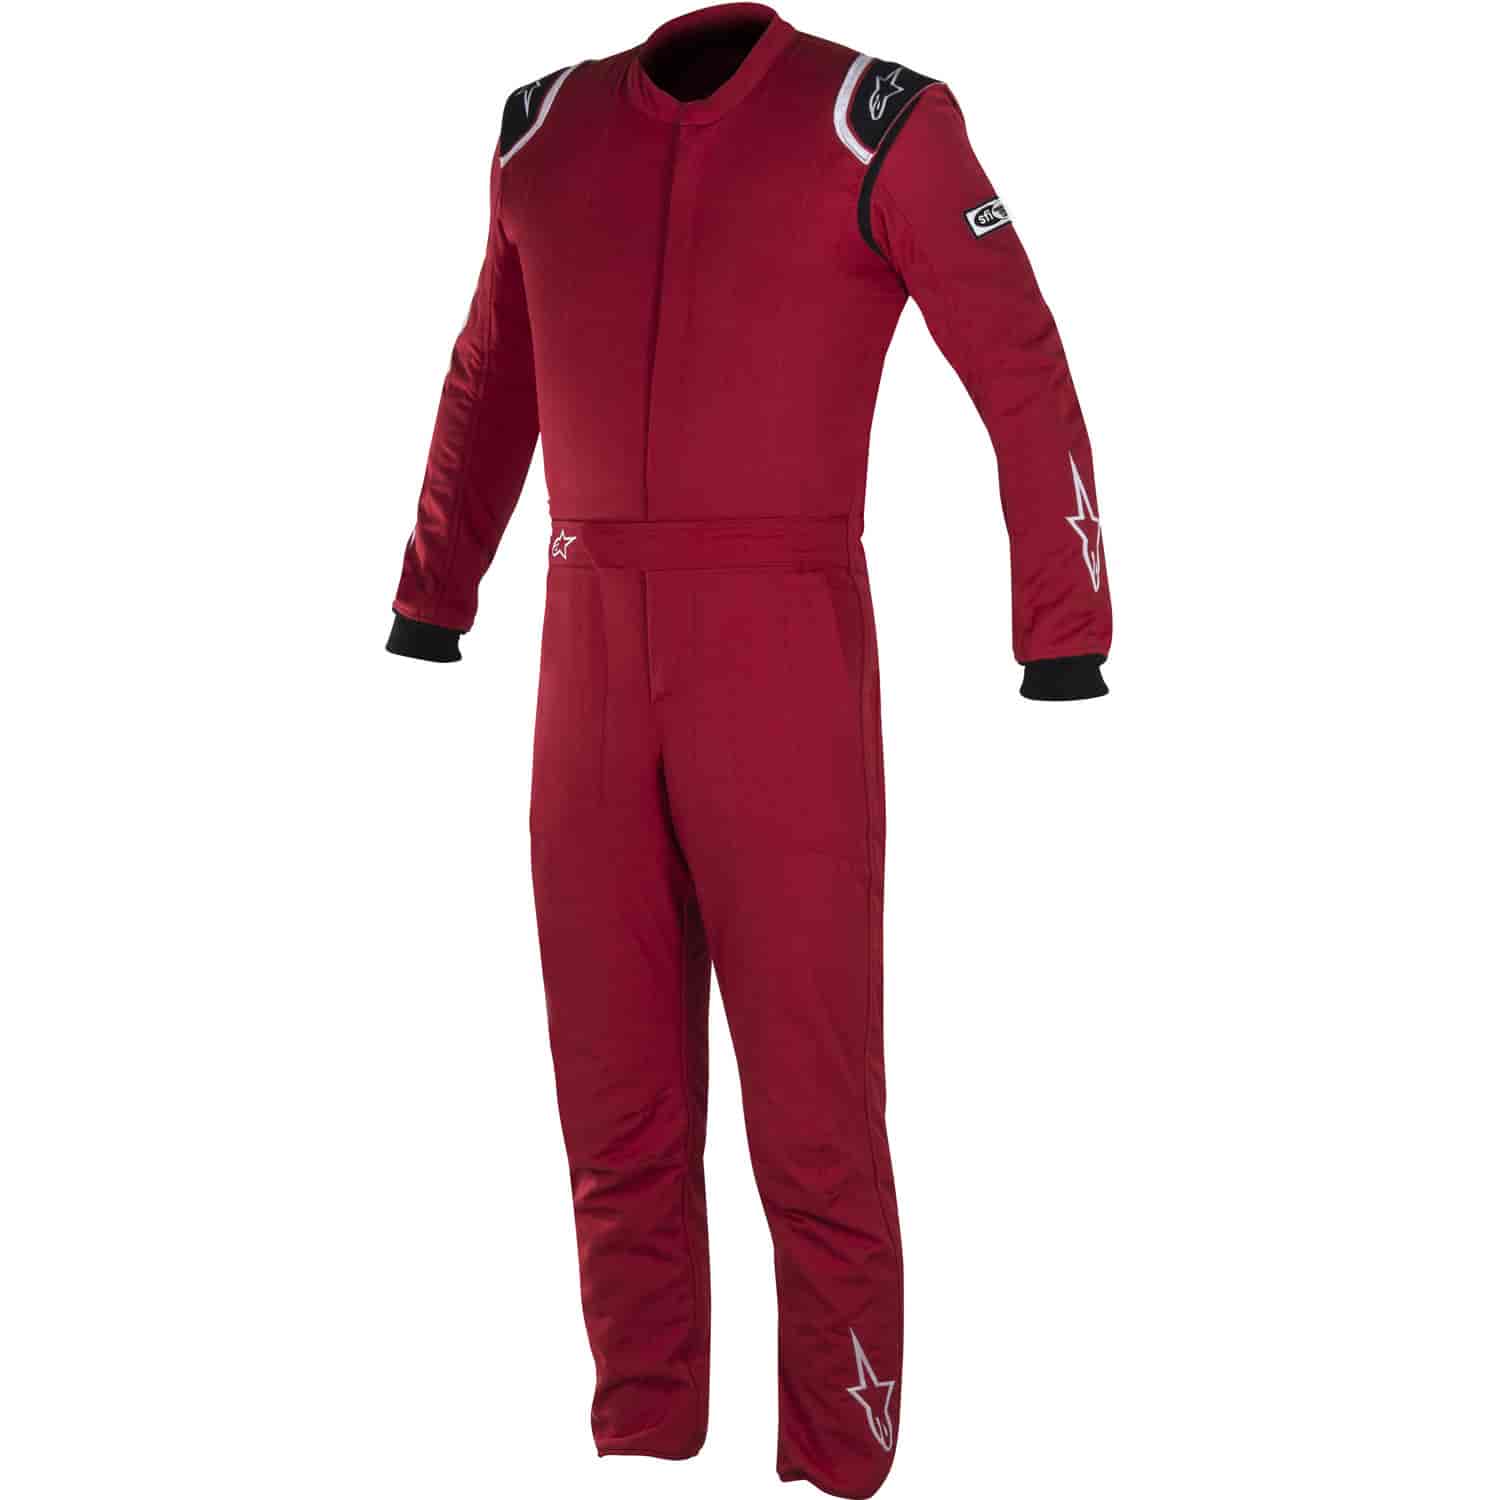 Delta Driving Suit Red/Black/White SFI 3.2A/5